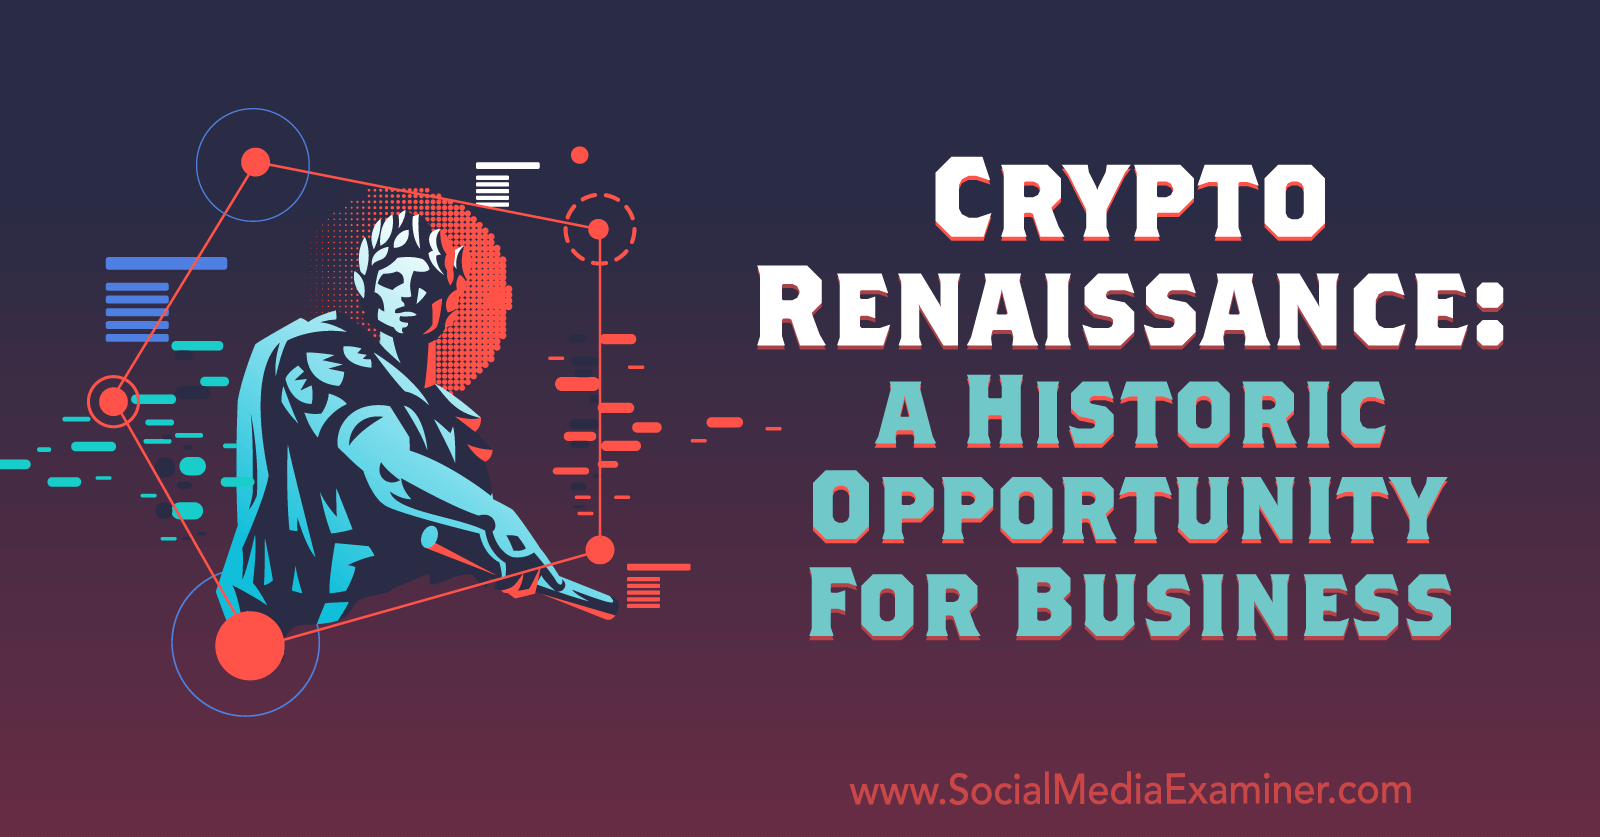 Crypto Renaissance: A Historic Opportunity for Business on Social Media Examiner